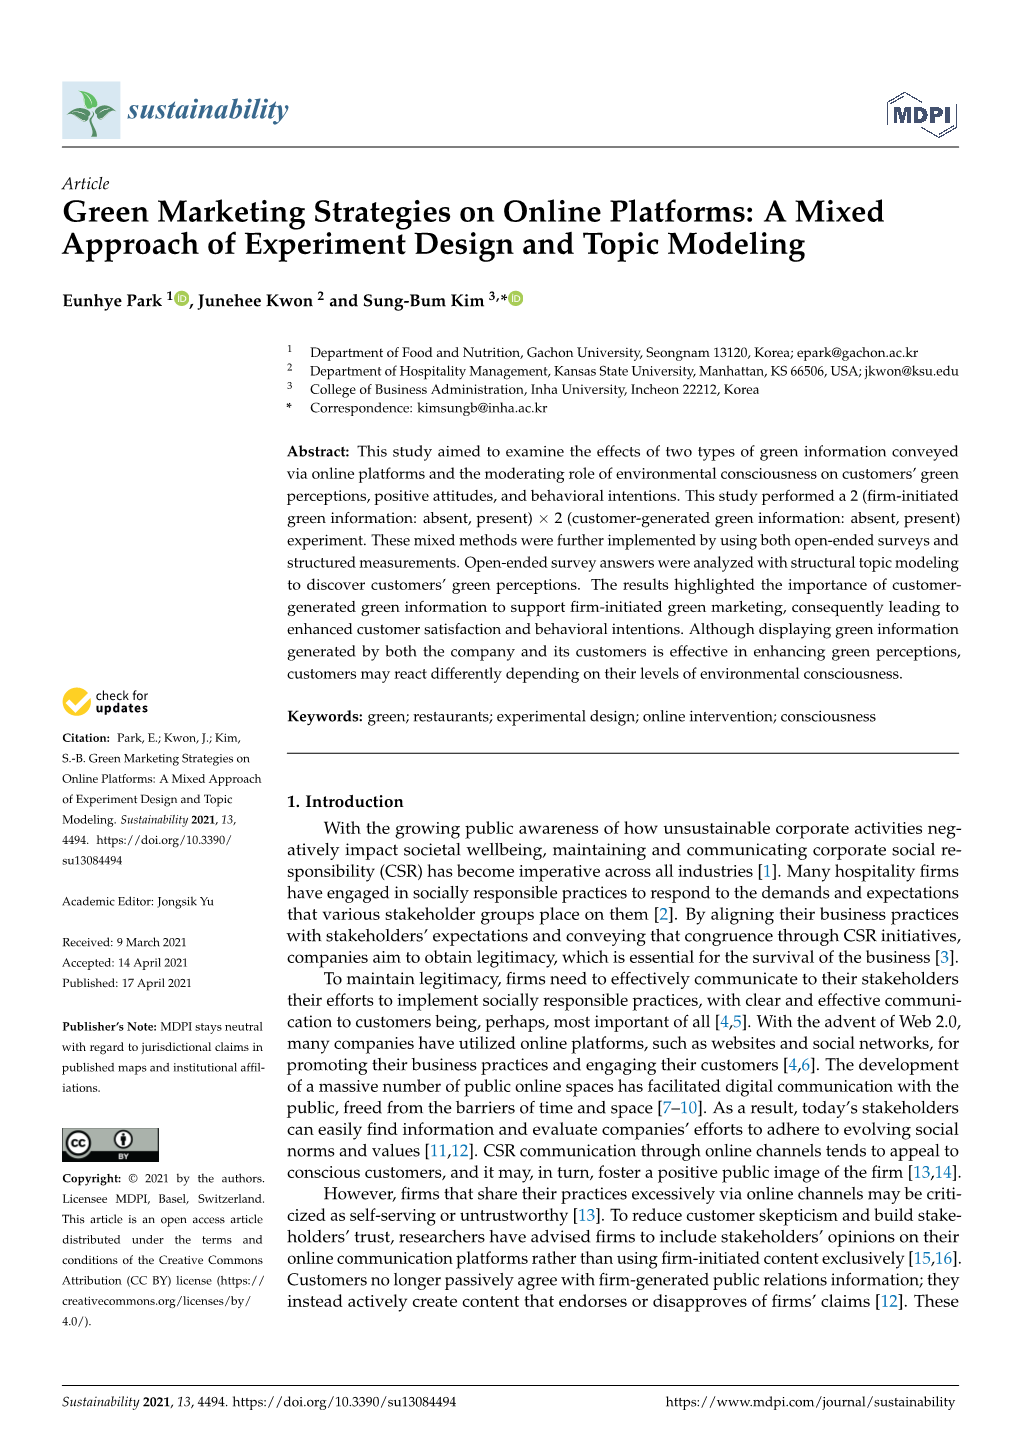 A Mixed Approach of Experiment Design and Topic Modeling